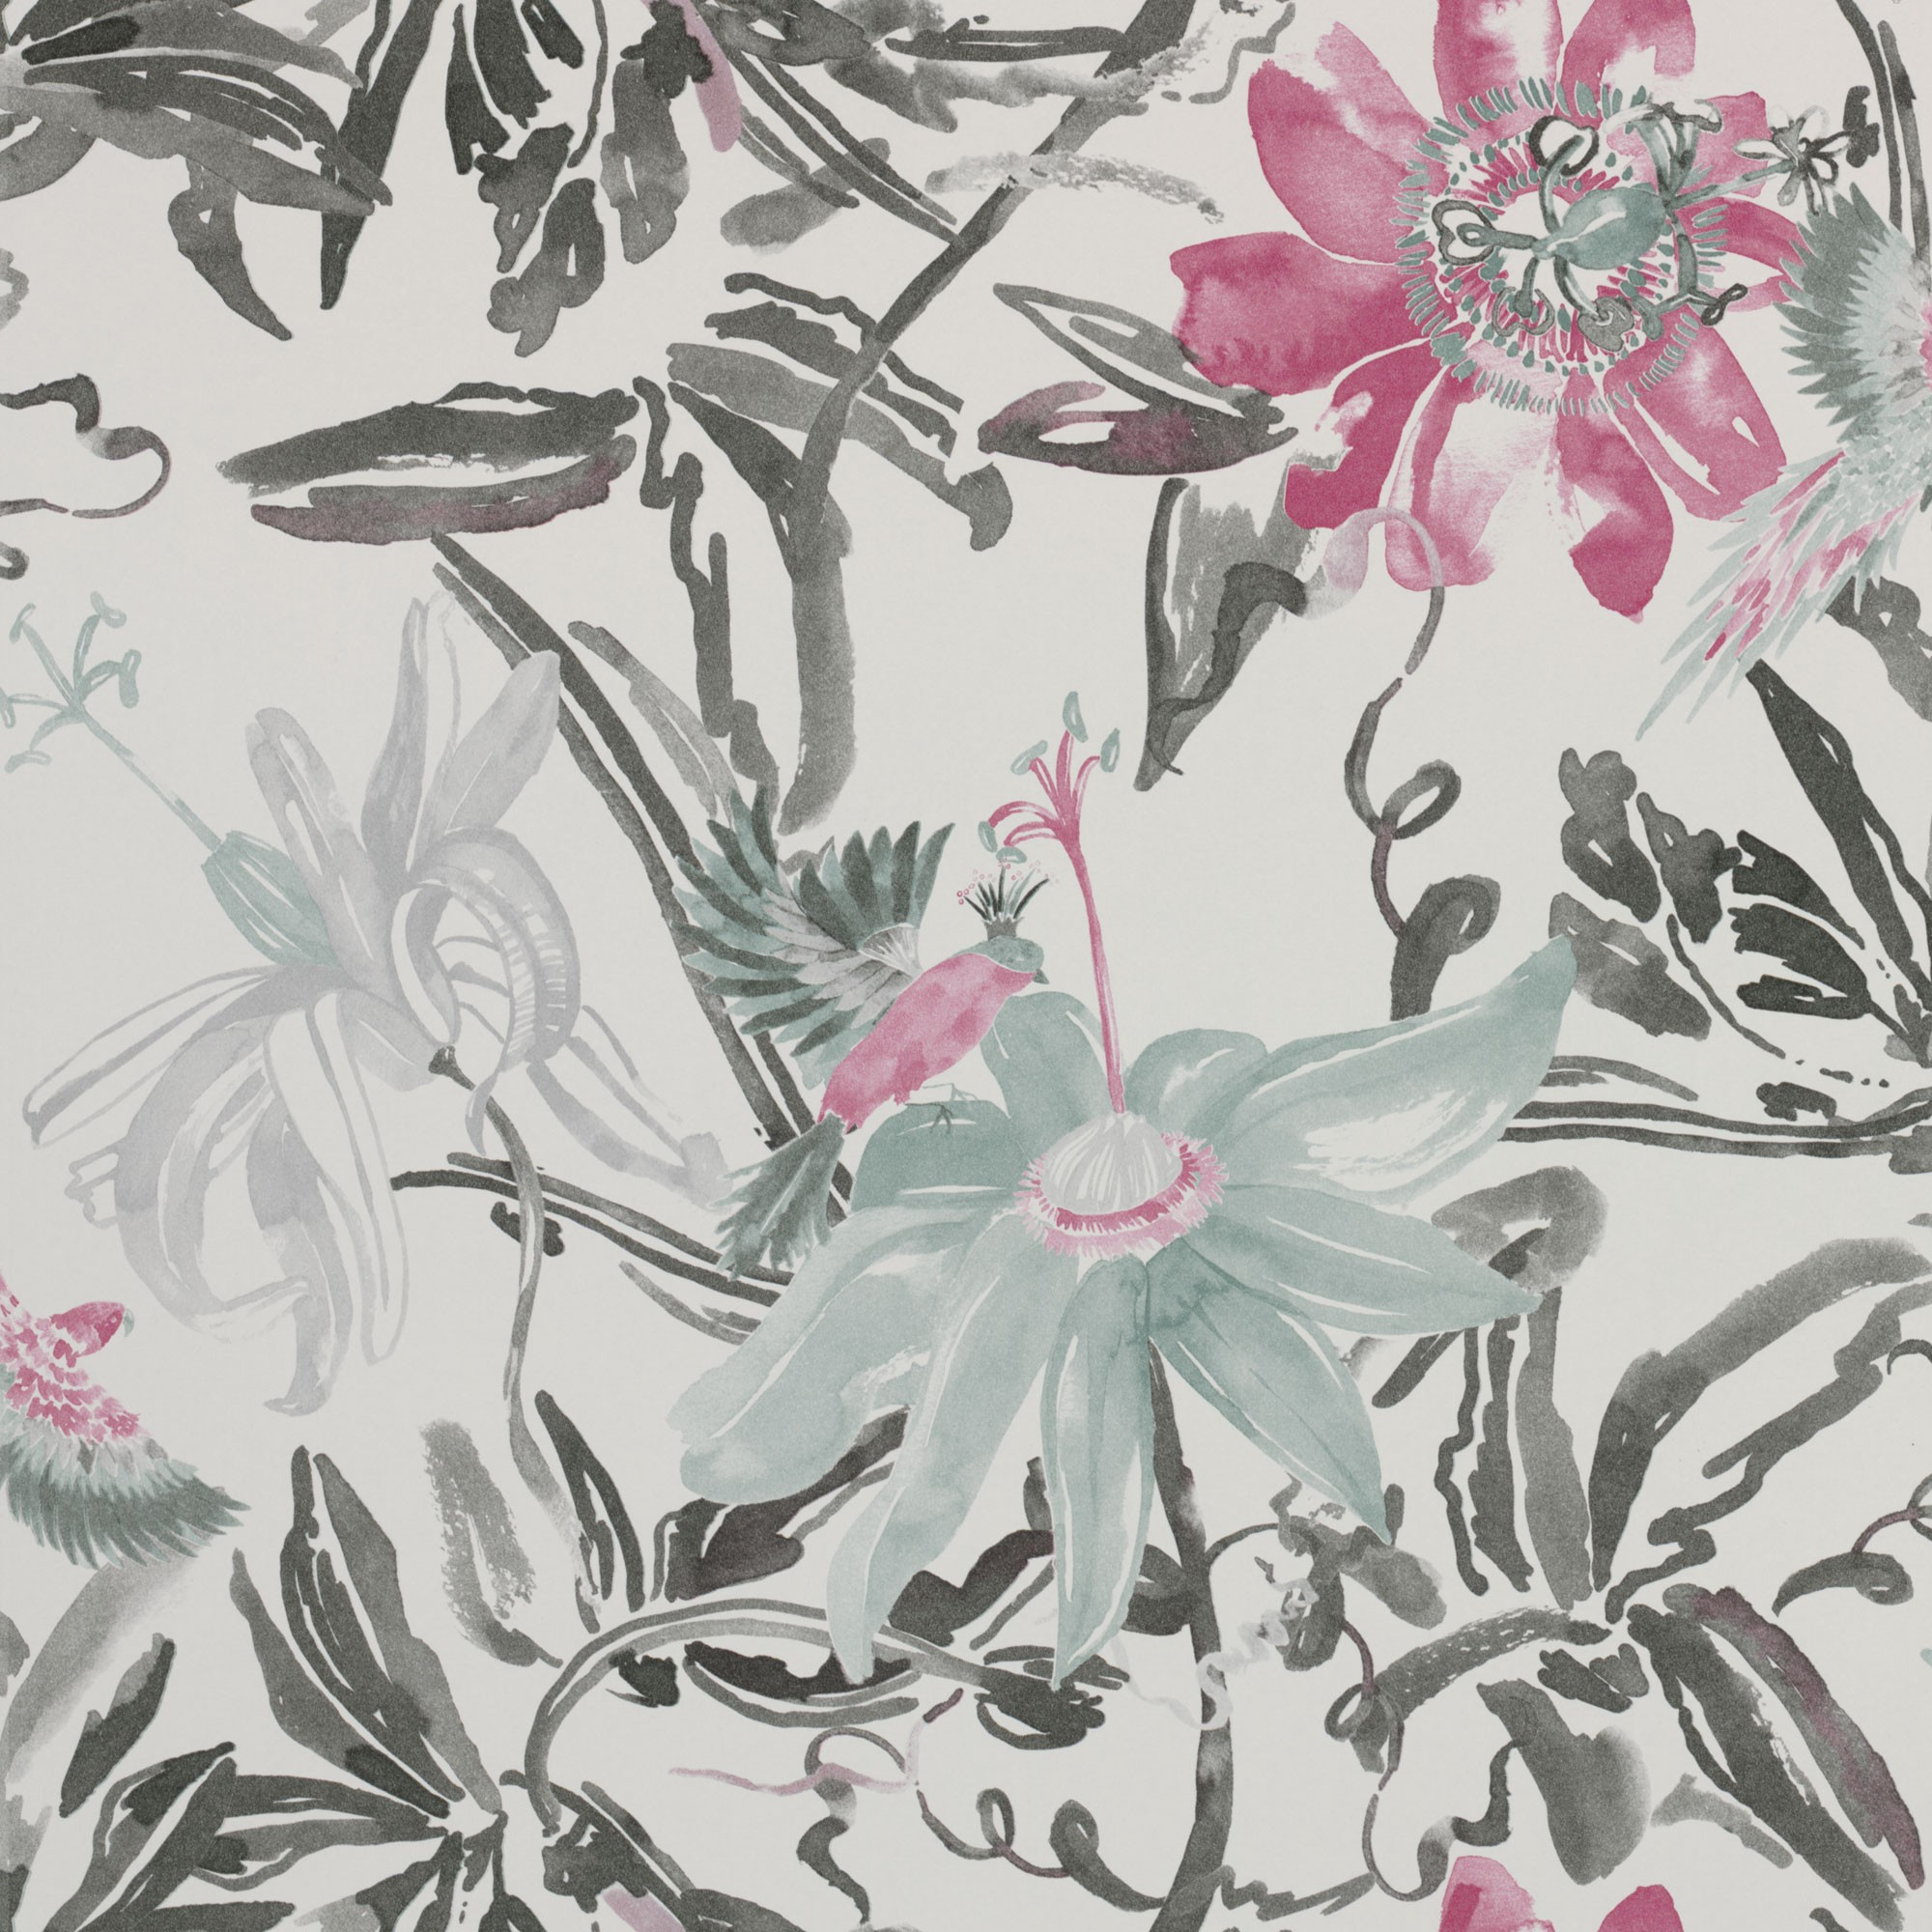 2000x2000 Flowers Watercolour Silver Grey and Pink-3900020